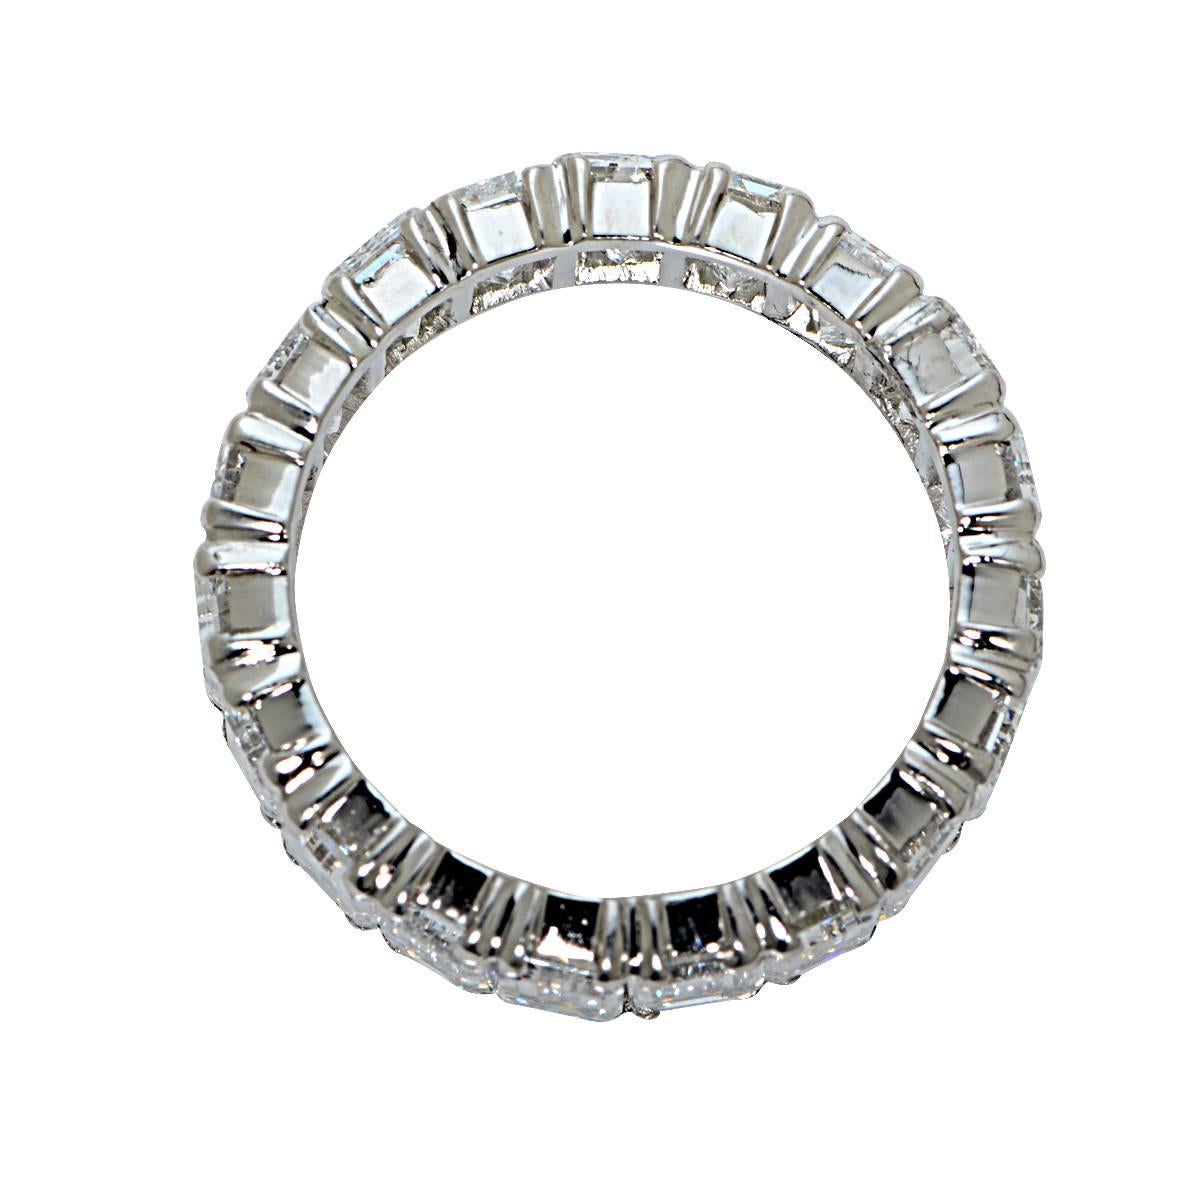 Platinum Eternity Band with 19 Emerald Cut Diamonds Weighing Approximately 9.10cts, F Color, VS Clarity. Ring Size: 7.